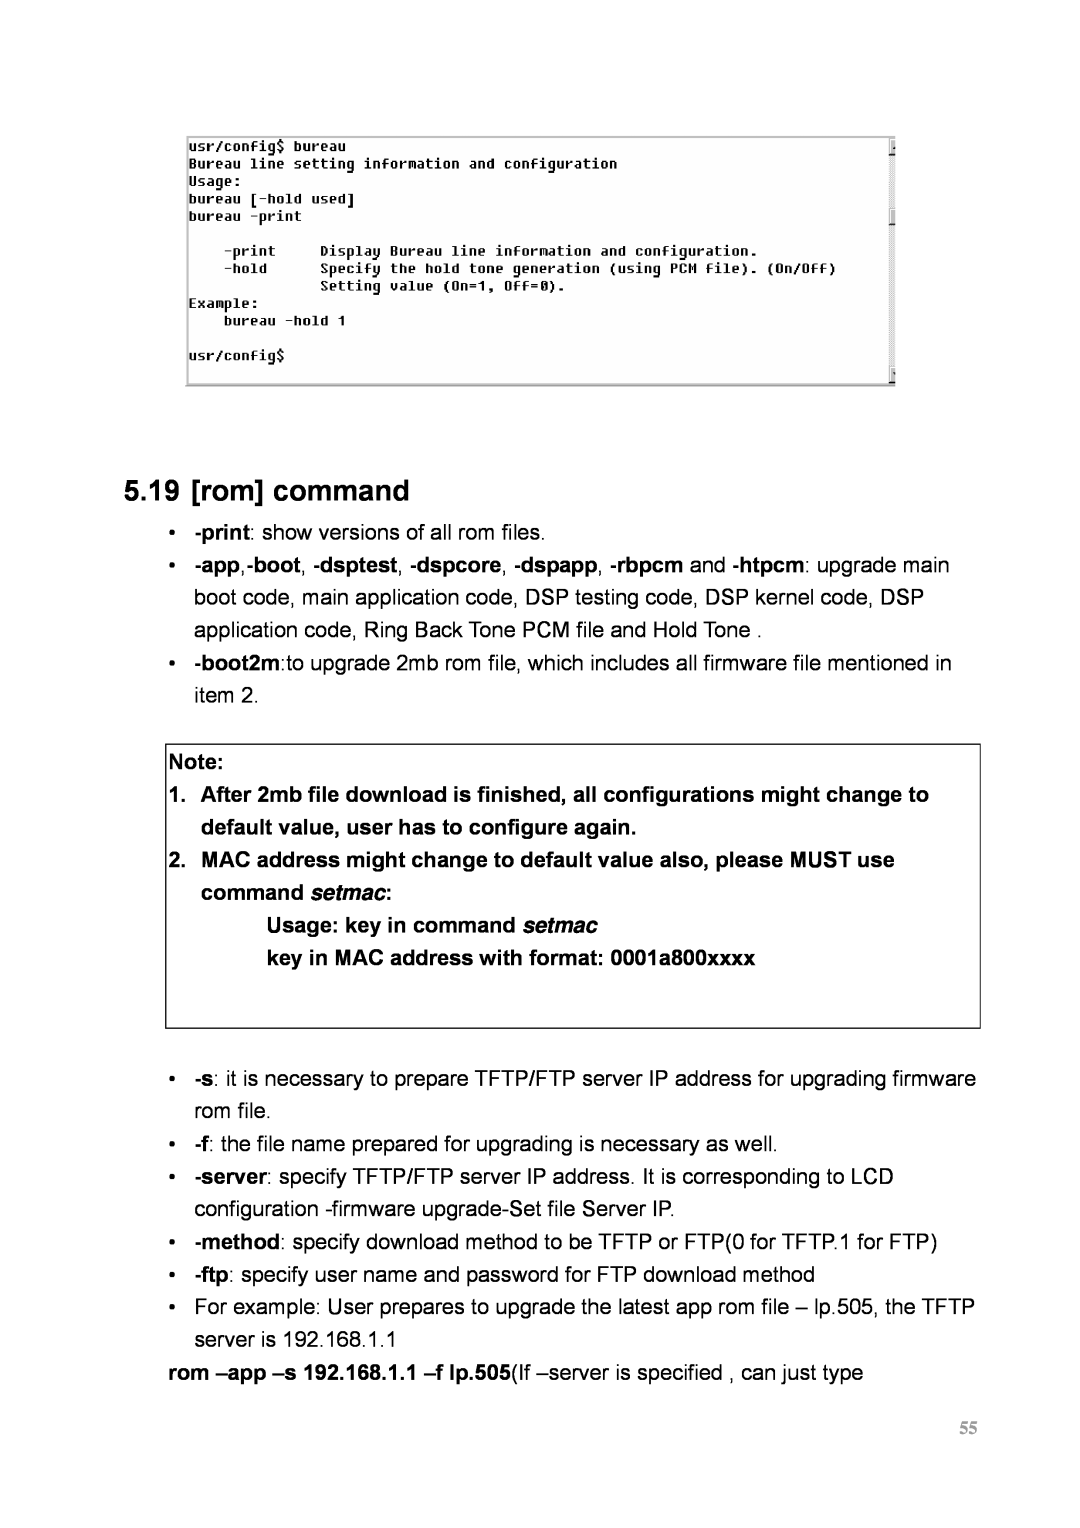 MicroNet Technology SP5100 user manual rom command 